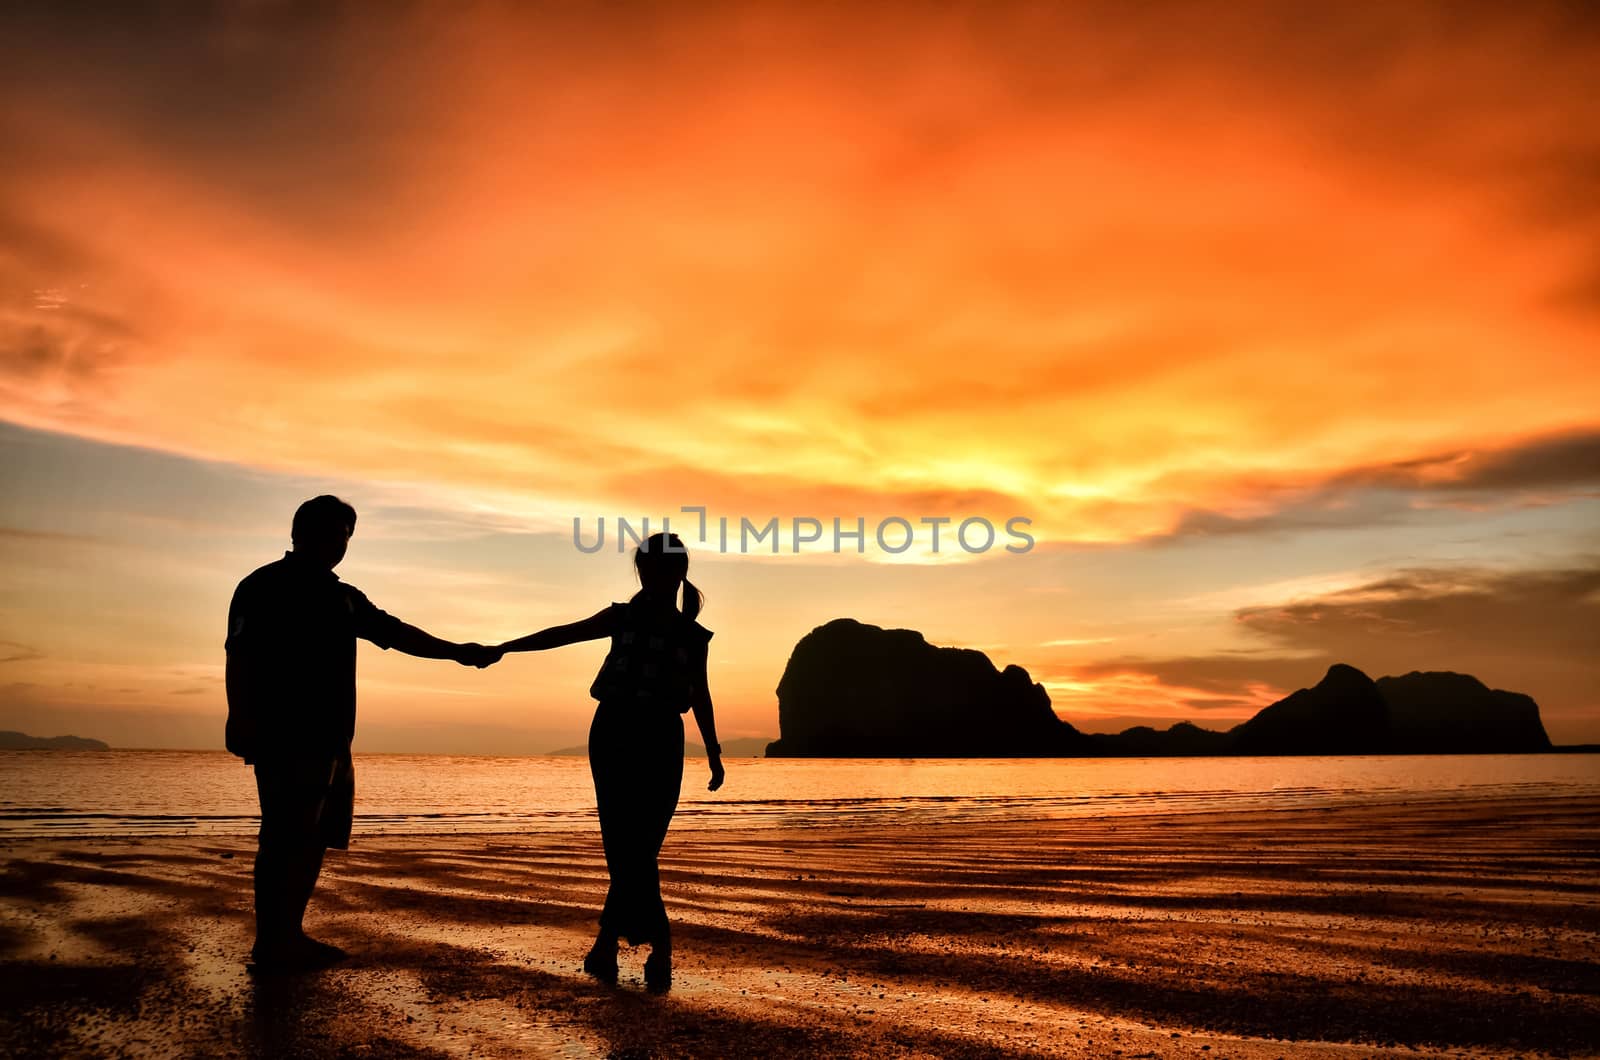 Romantic couple holding hands at sunset on the beach